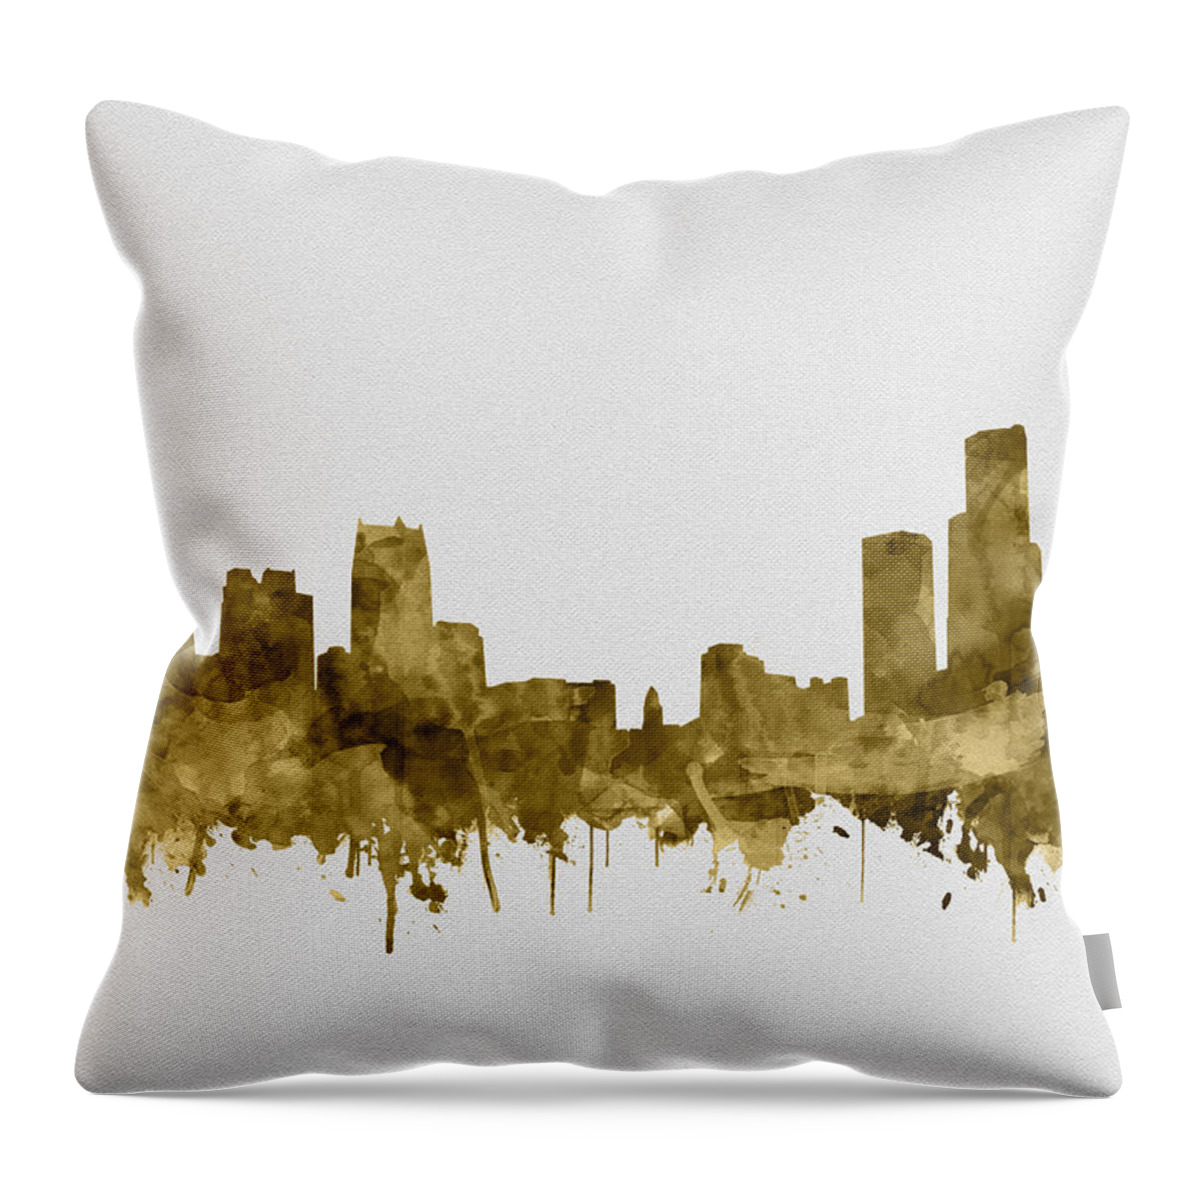 Detroit Throw Pillow featuring the painting Detroit Skyline Watercolor Sepia #1 by Bekim M